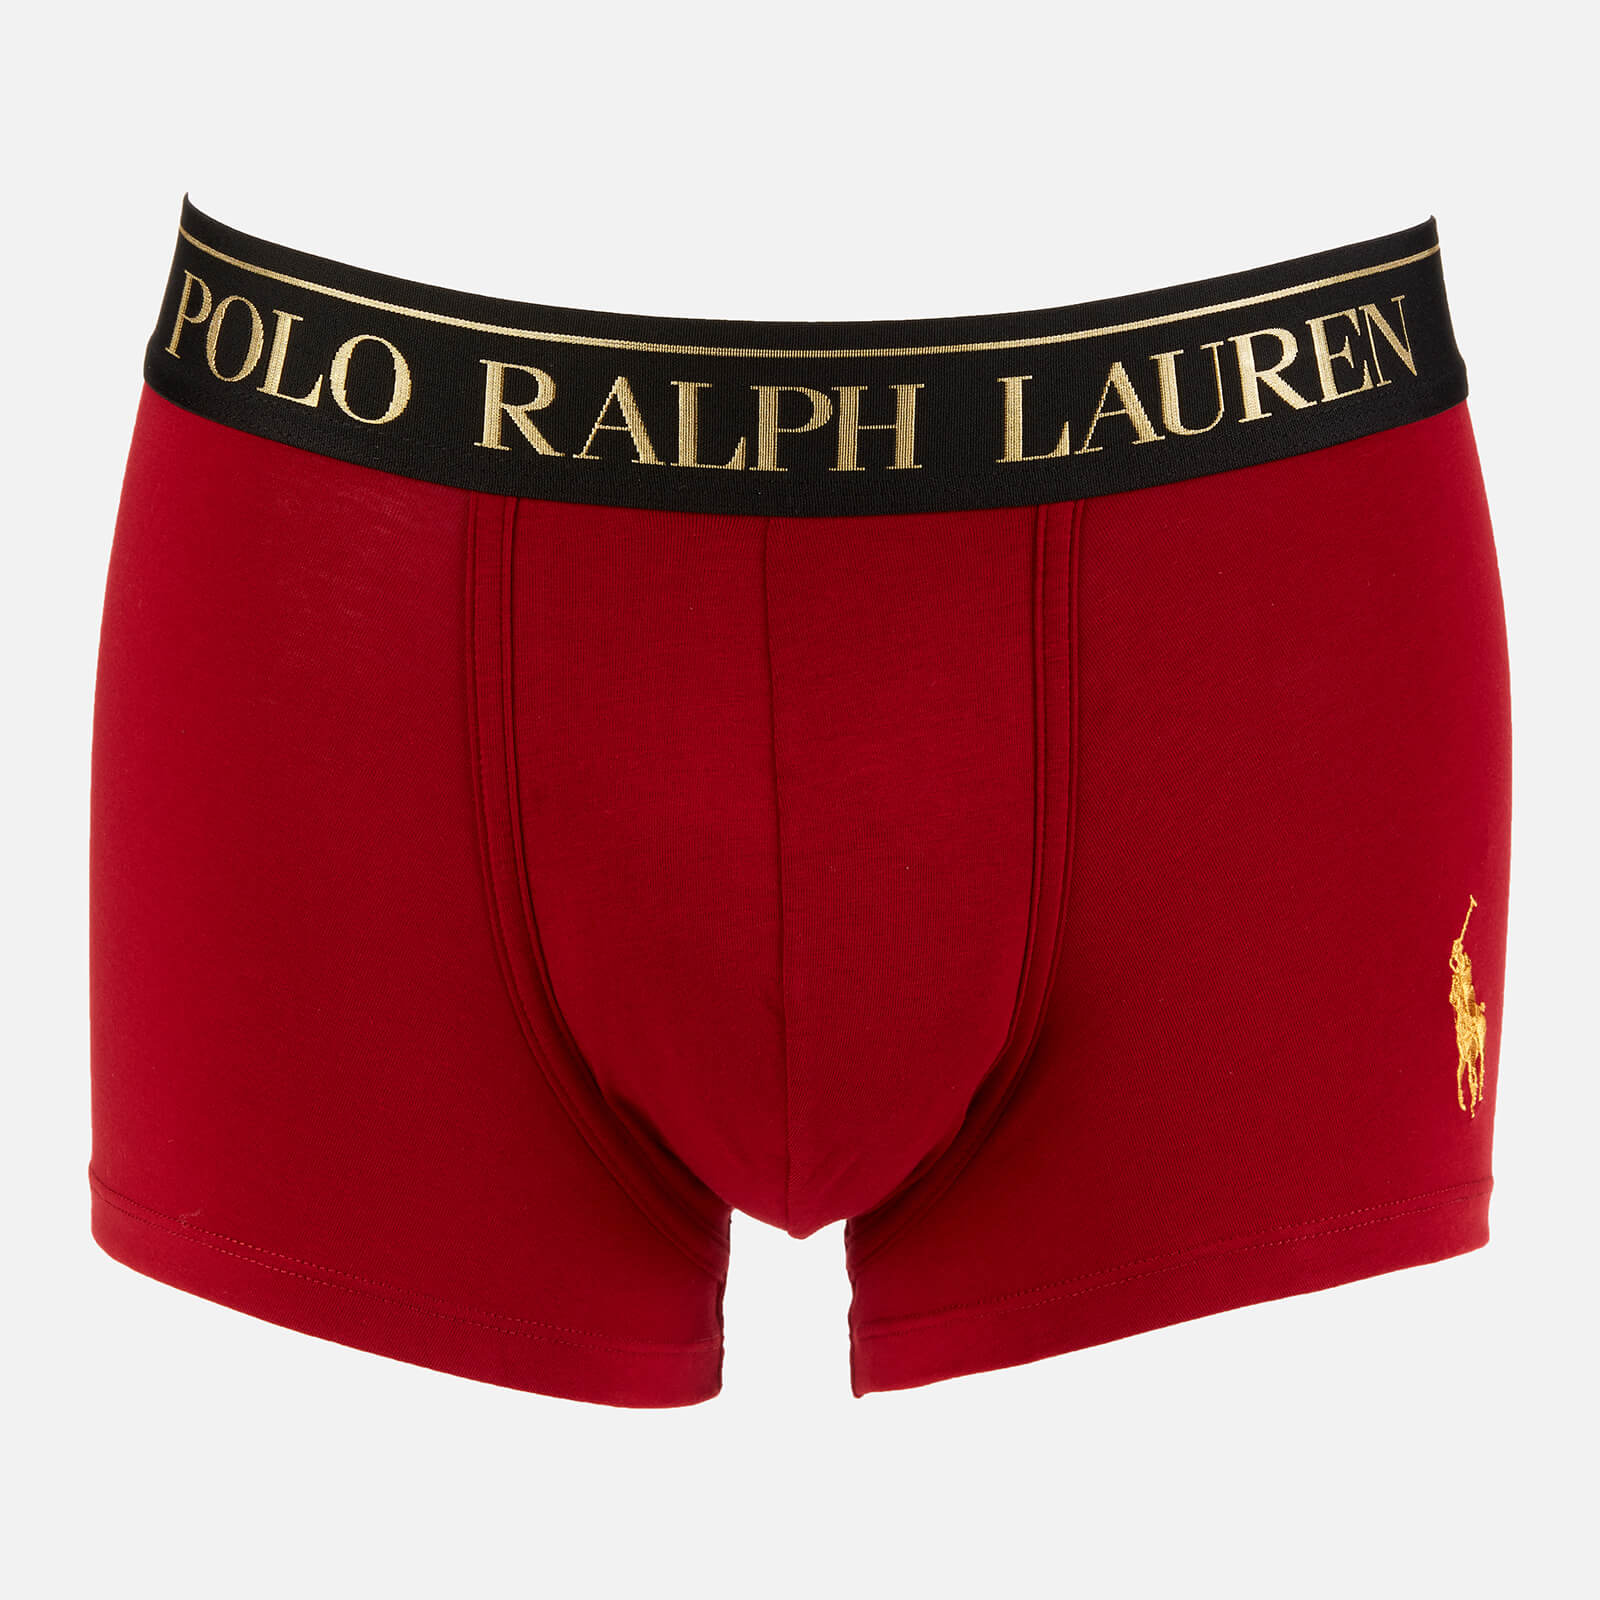 Polo Ralph Lauren Men's Gold Polo Player Trunk Boxer Shorts - Holiday Red - S